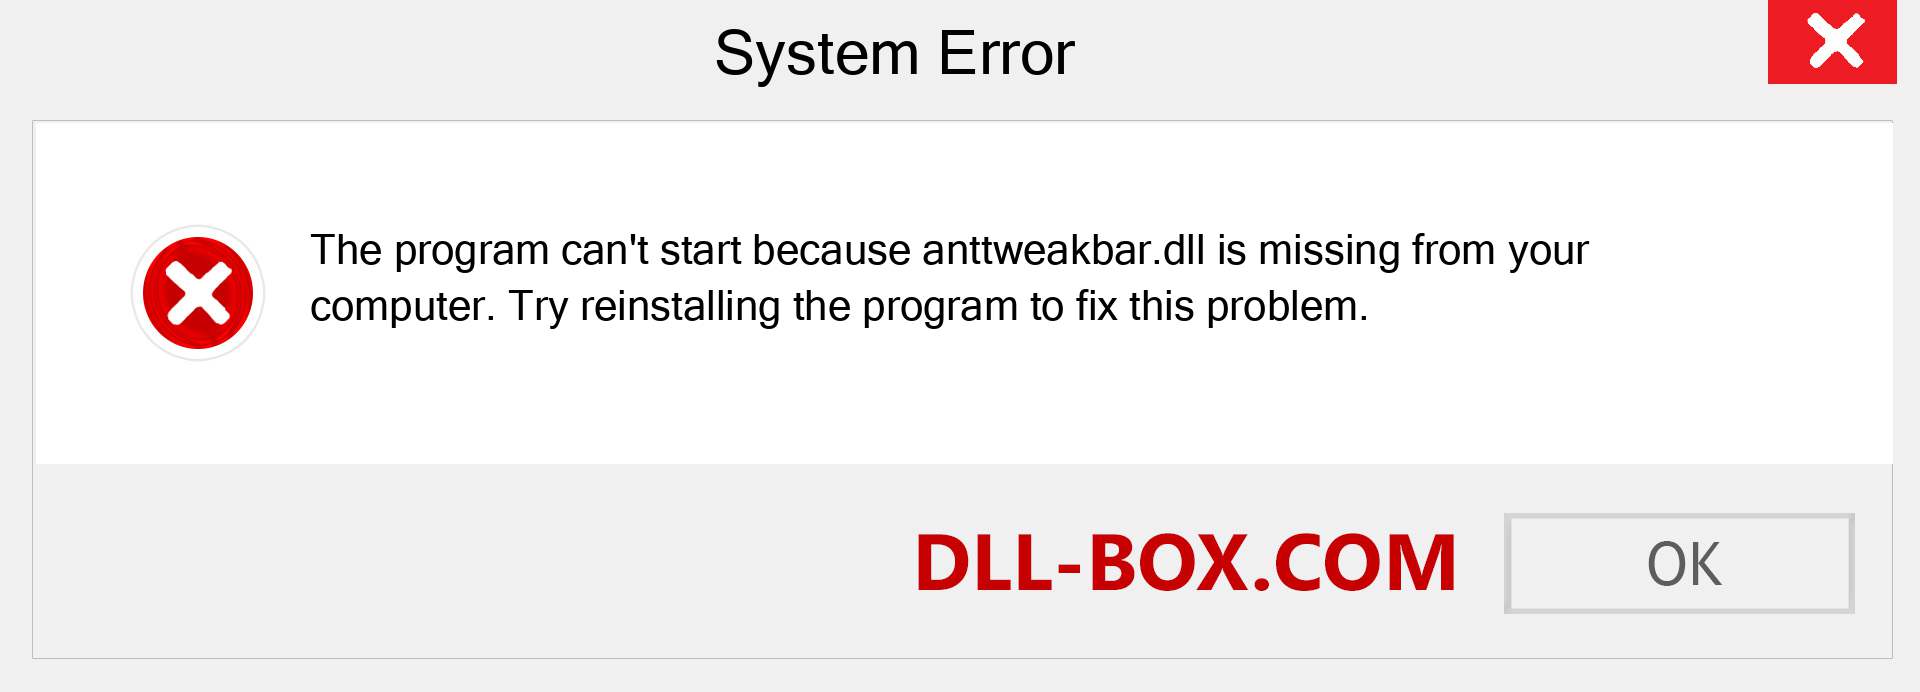  anttweakbar.dll file is missing?. Download for Windows 7, 8, 10 - Fix  anttweakbar dll Missing Error on Windows, photos, images